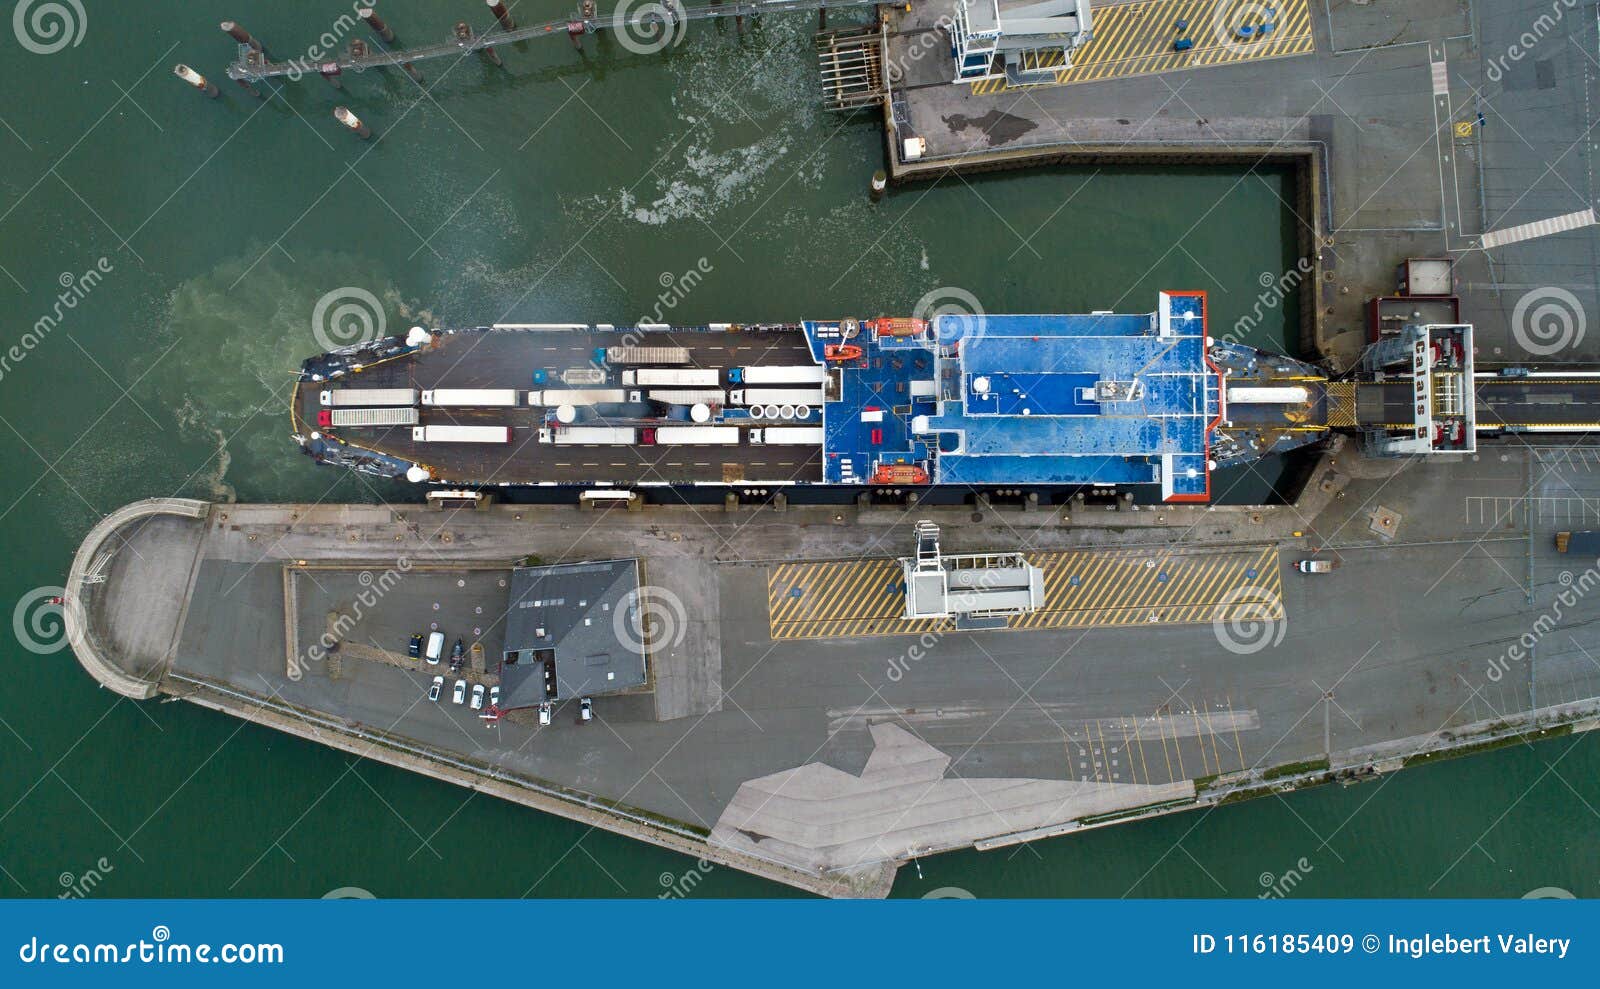 aerial view of a ferry boat in calais port, france